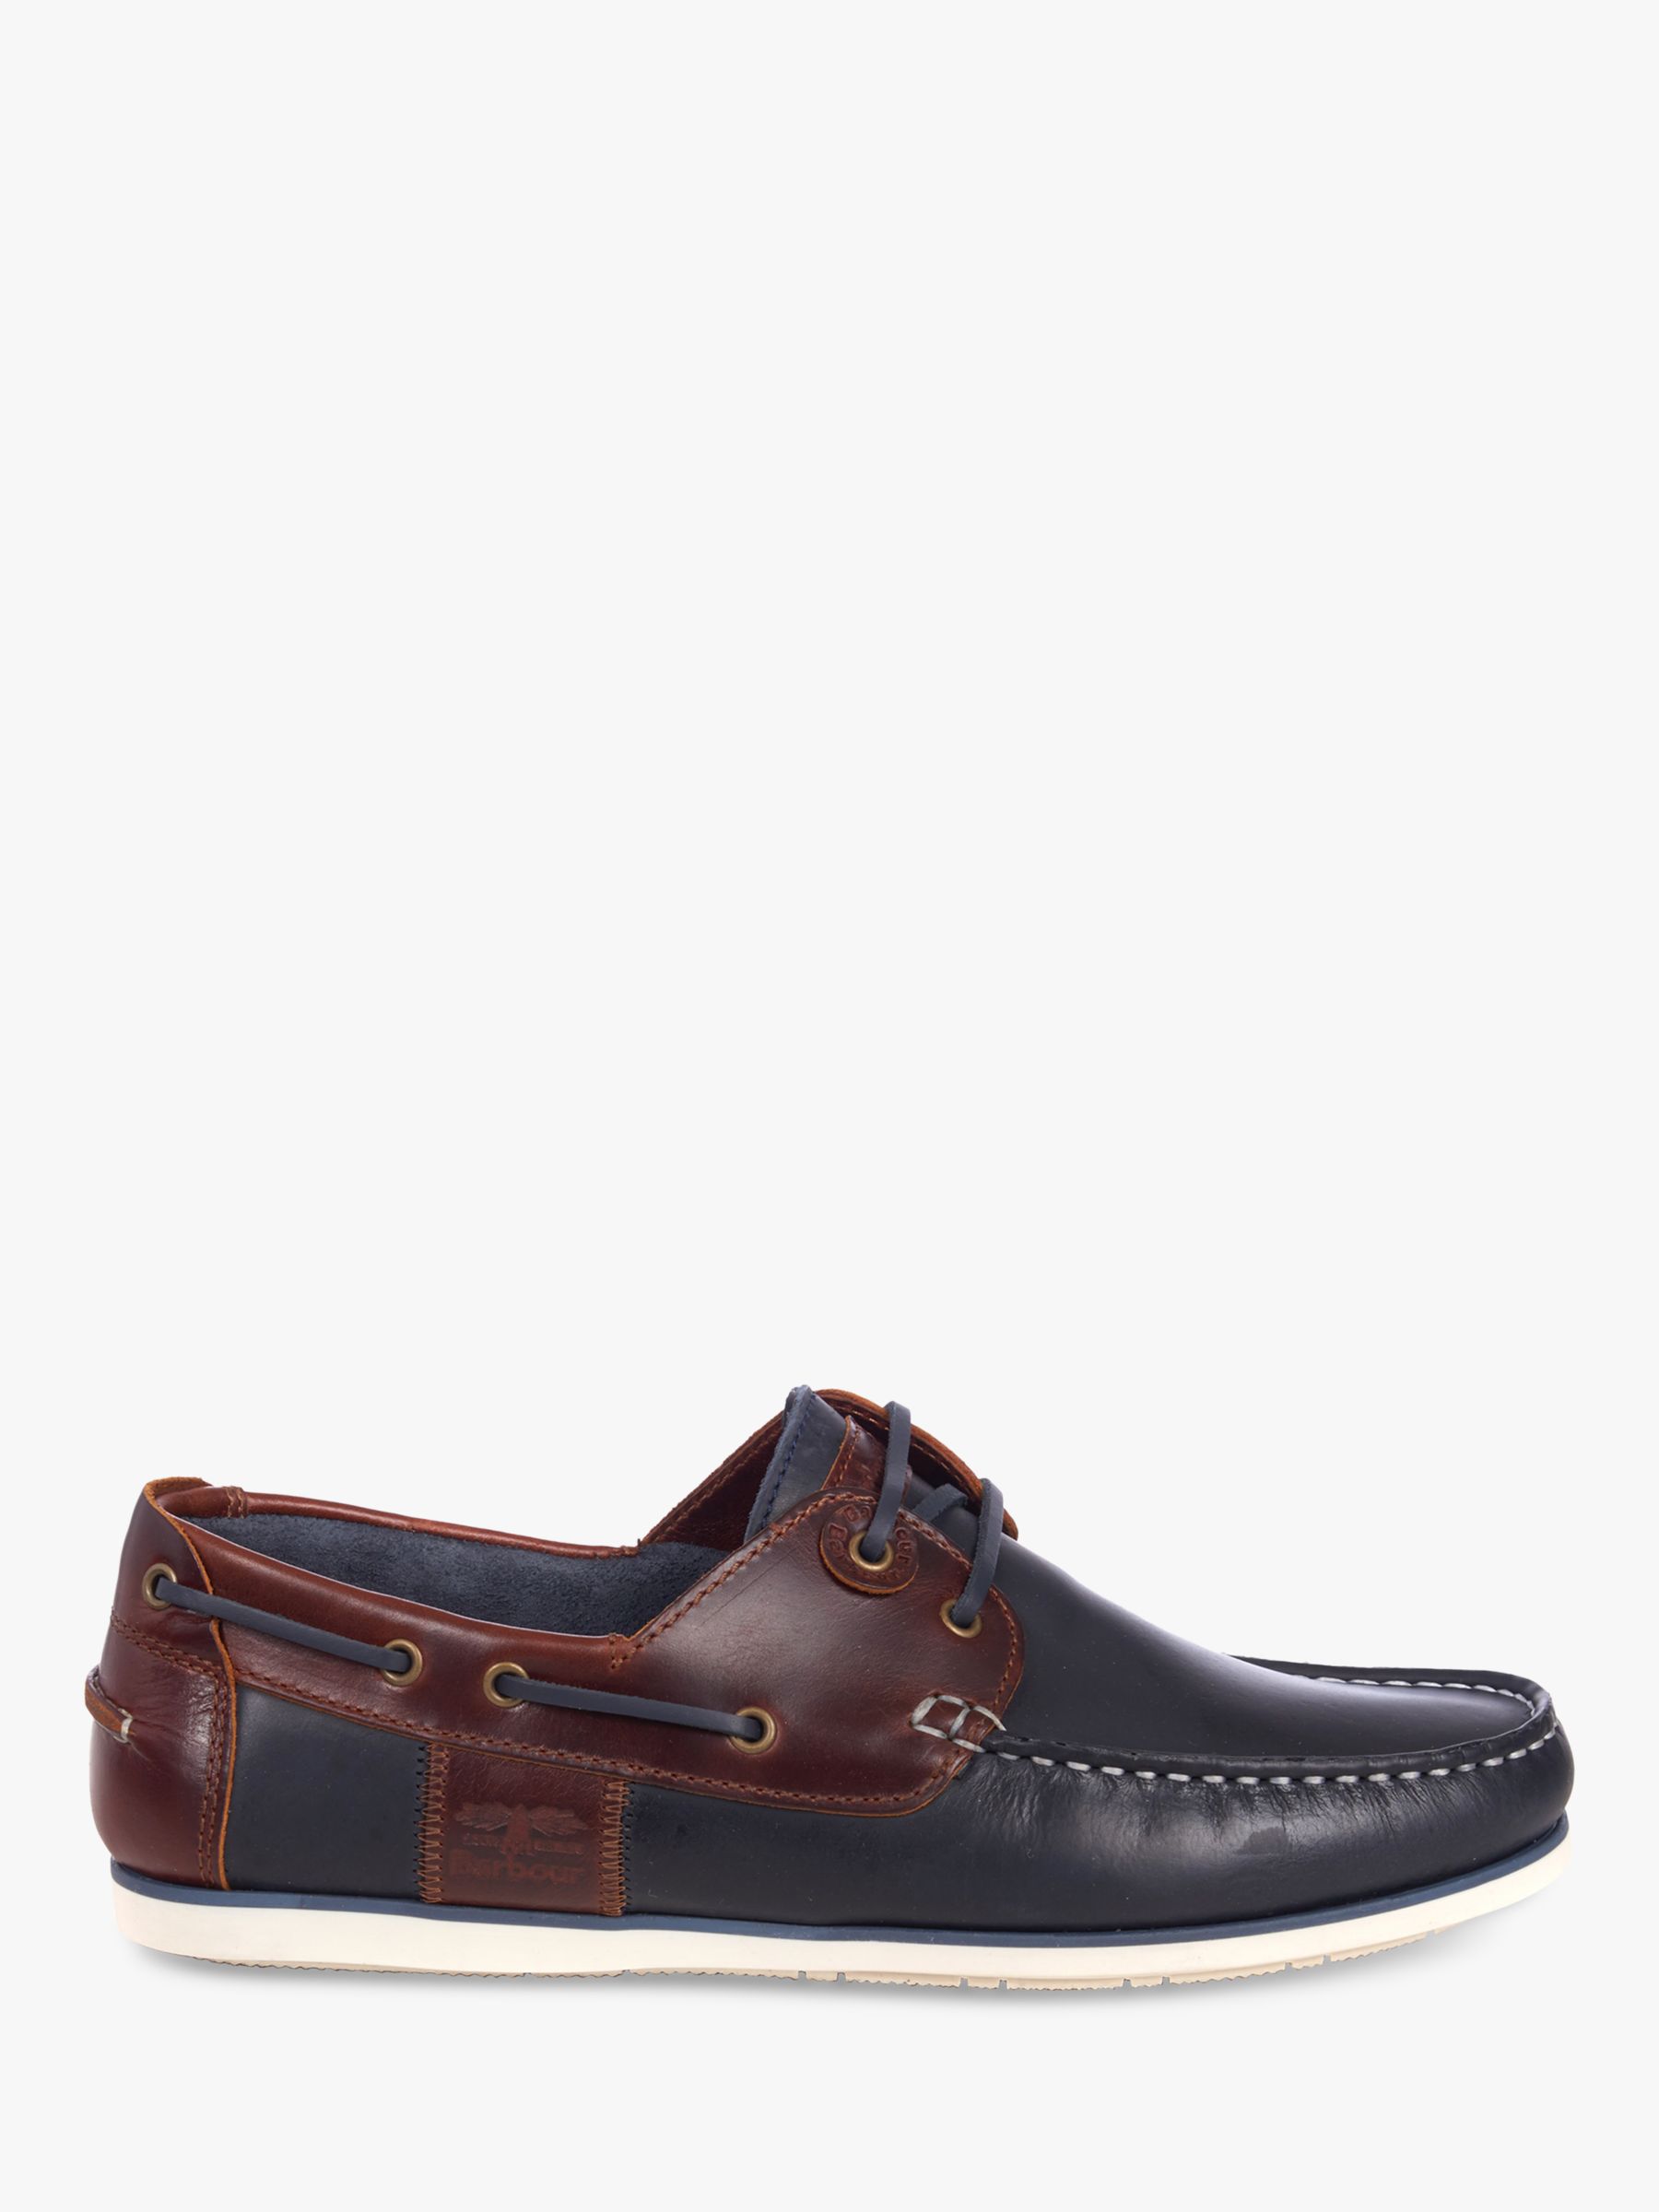 barbour capstan shoes Cheaper Than 